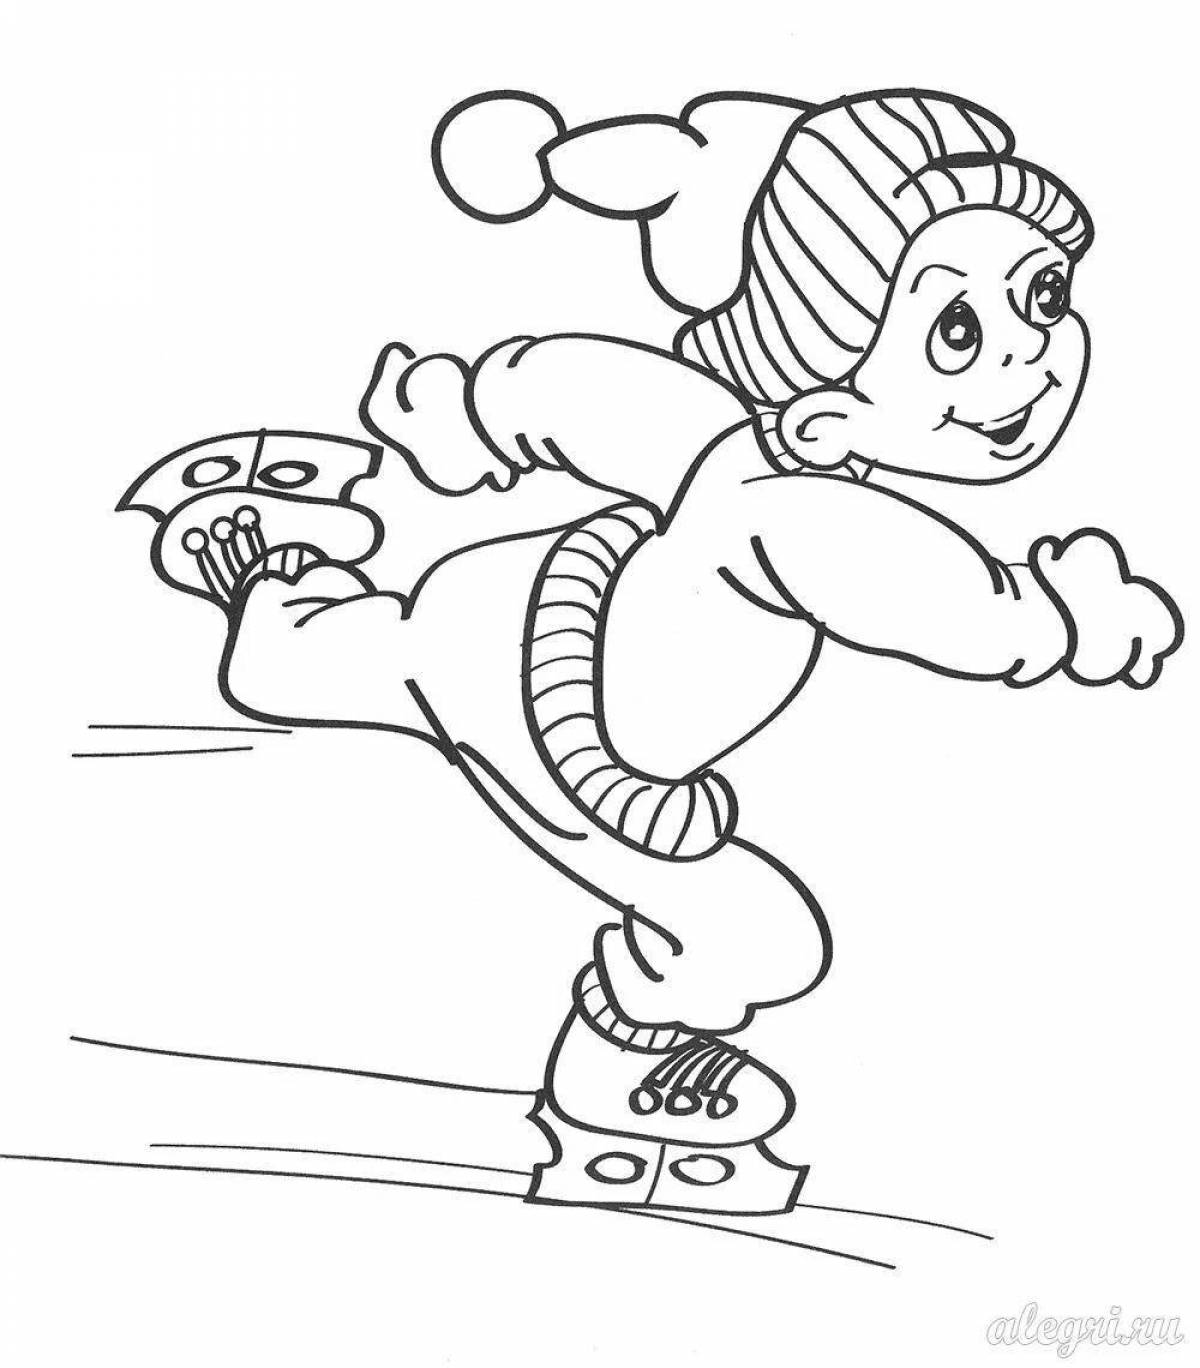 Colorful winter sport coloring page for 6-7 year olds